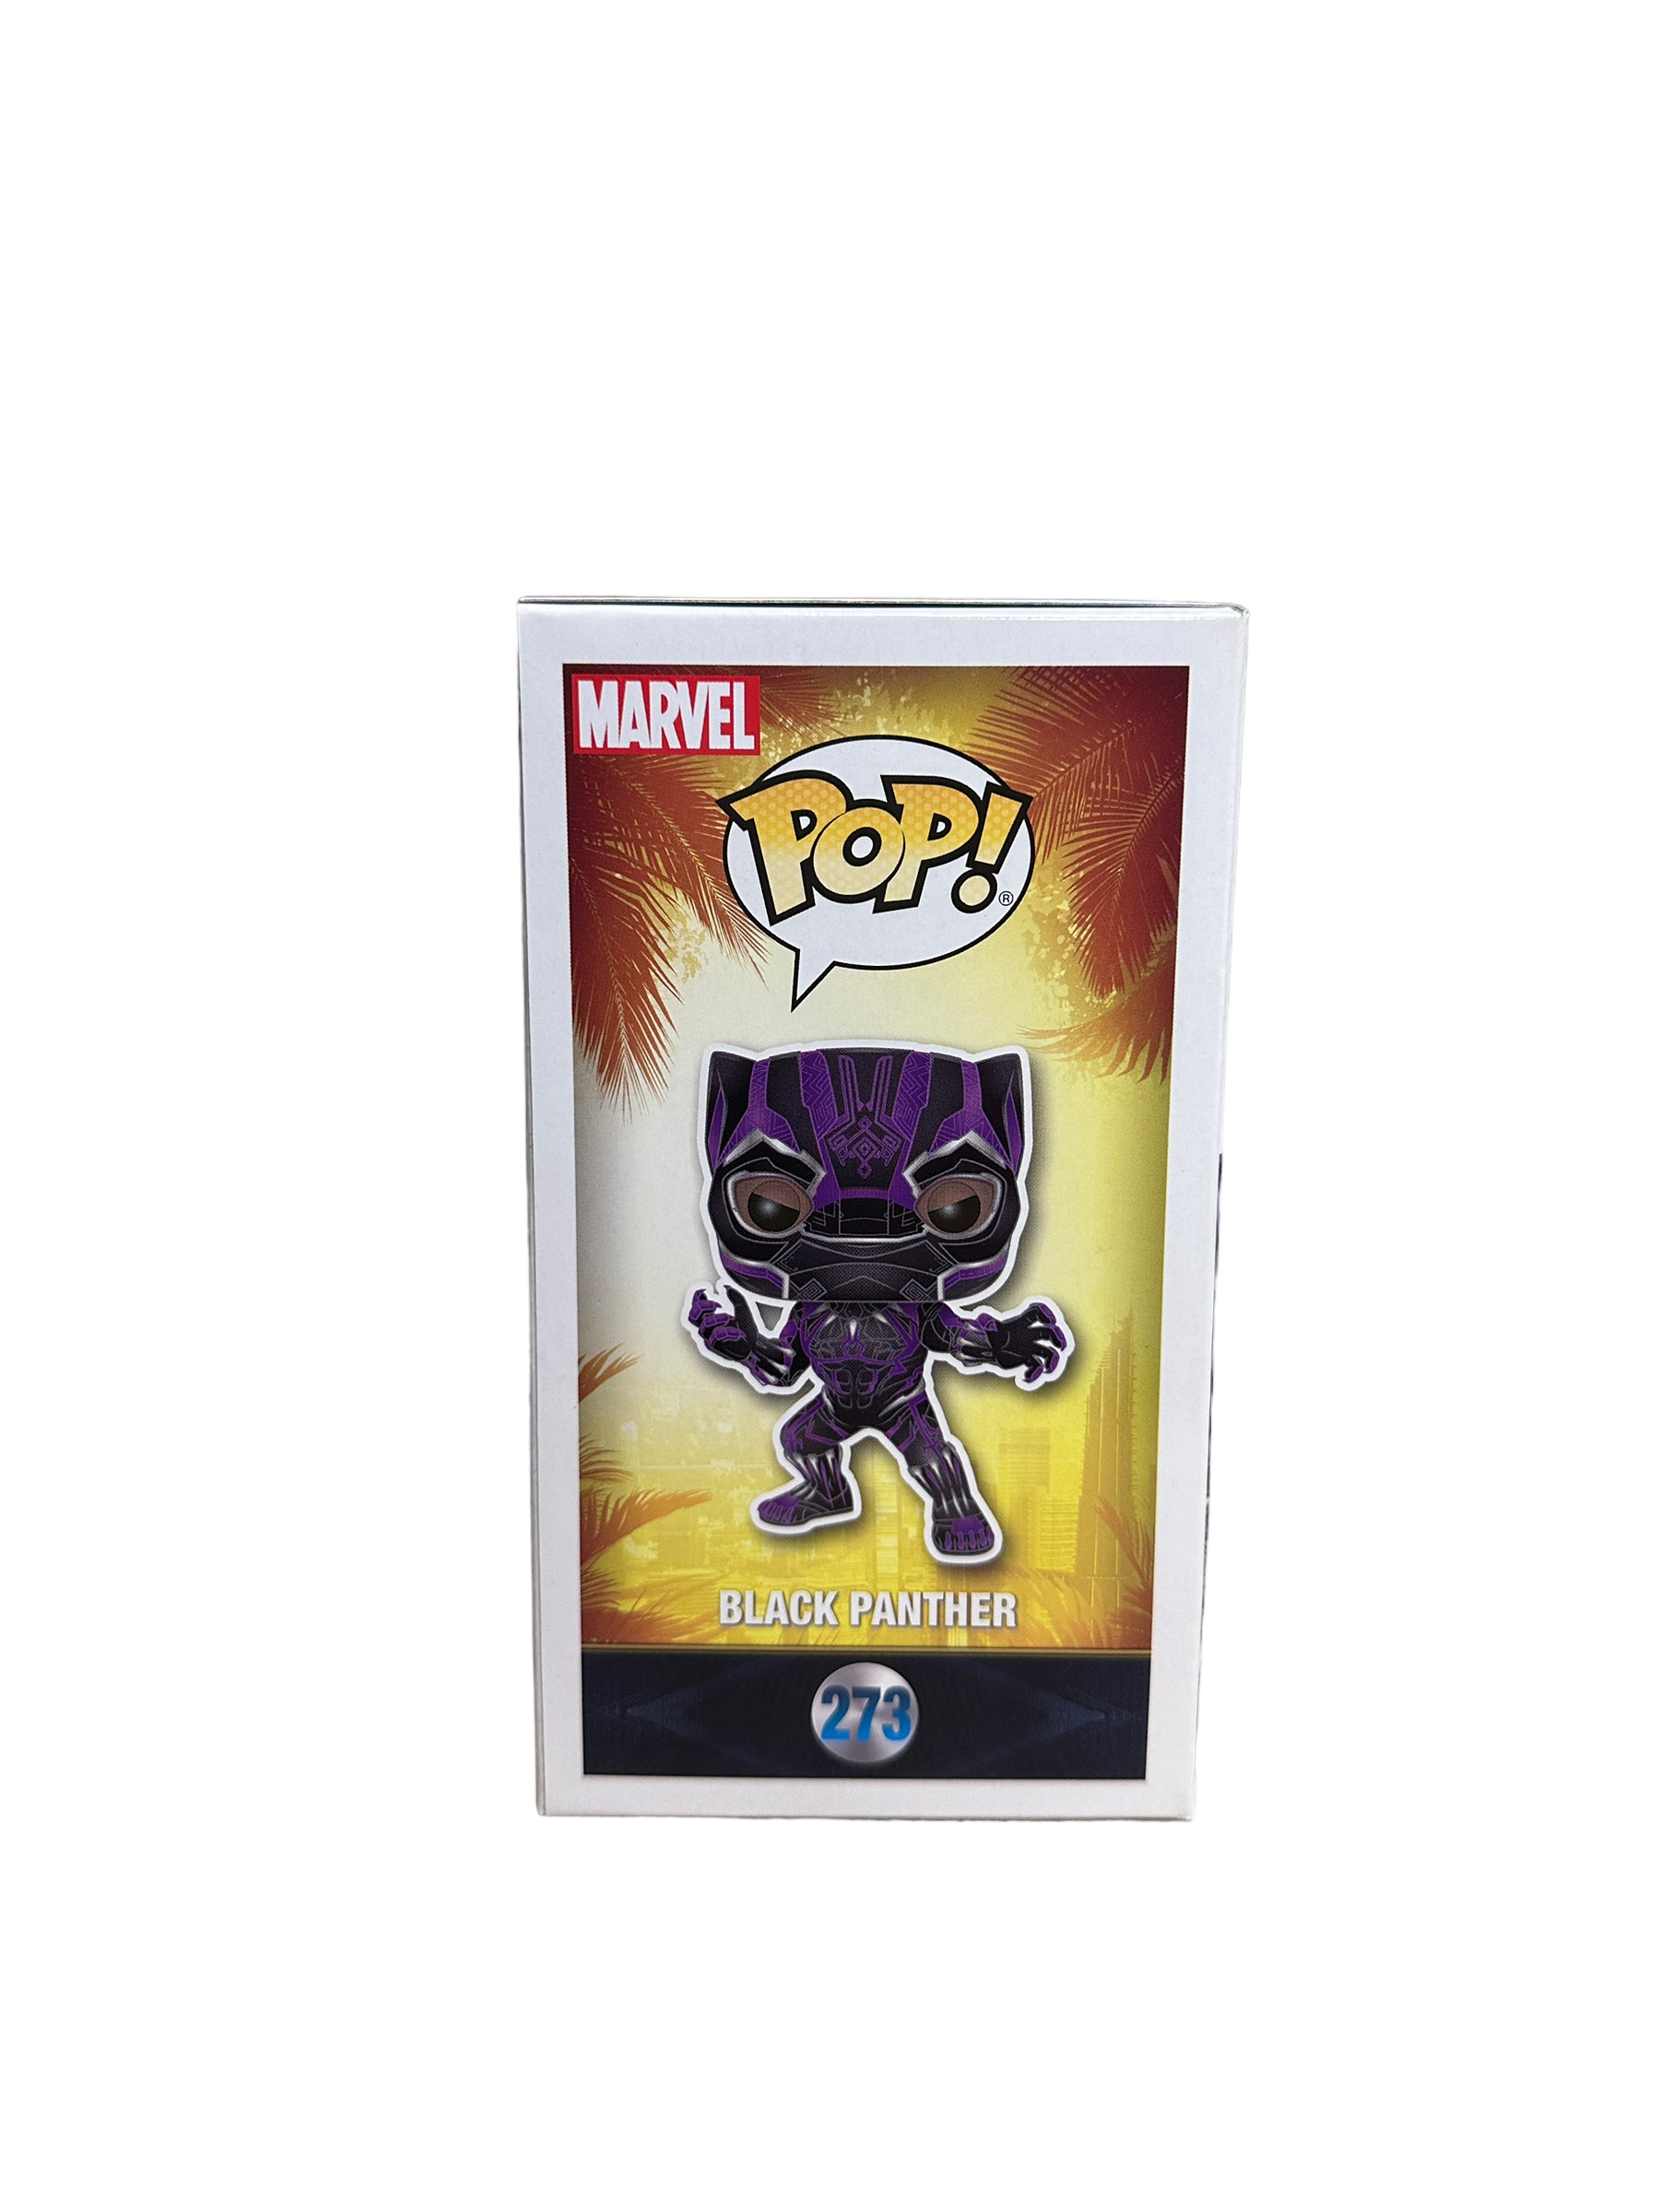 Black Panther #273 (Glows in the Dark) Funko Pop! - Black Panther - Target Exclusive - Condition 9.5/10